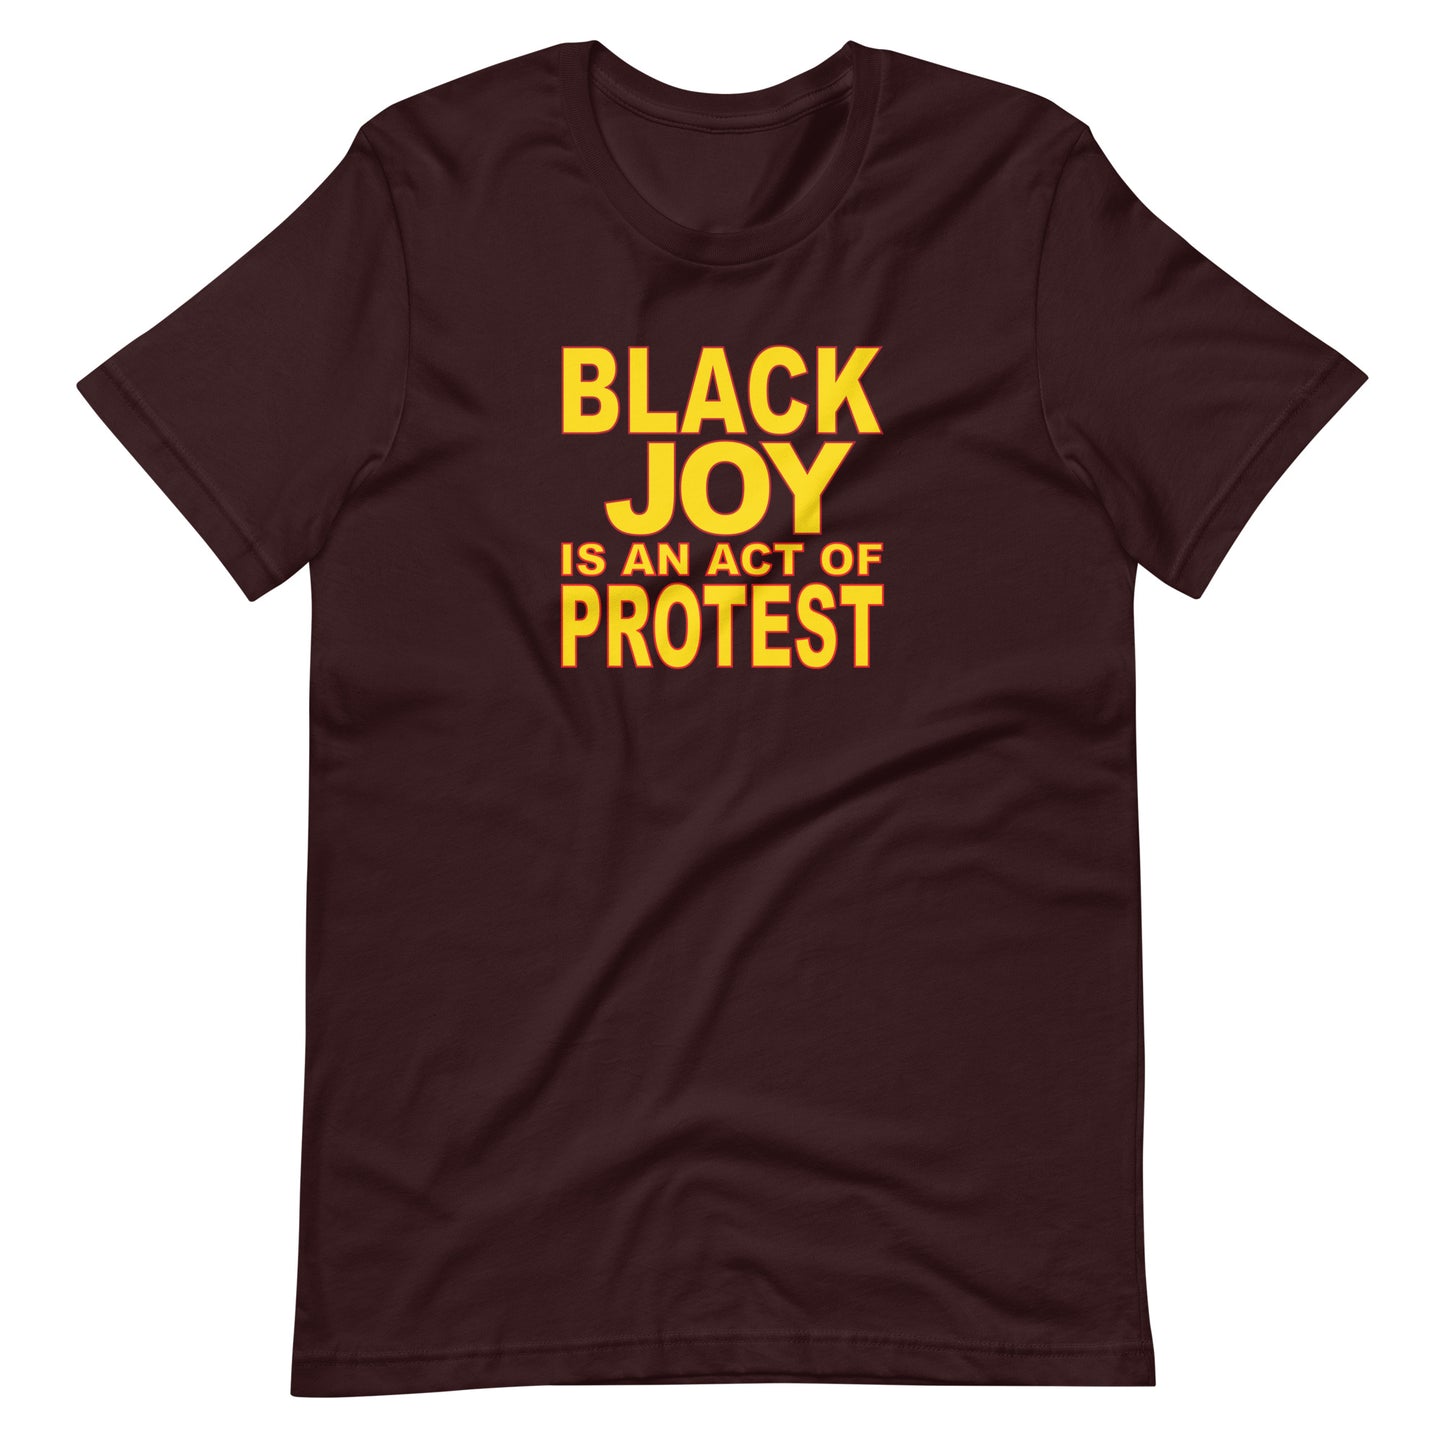 Black Joy Is An Act of Protest Universal tee